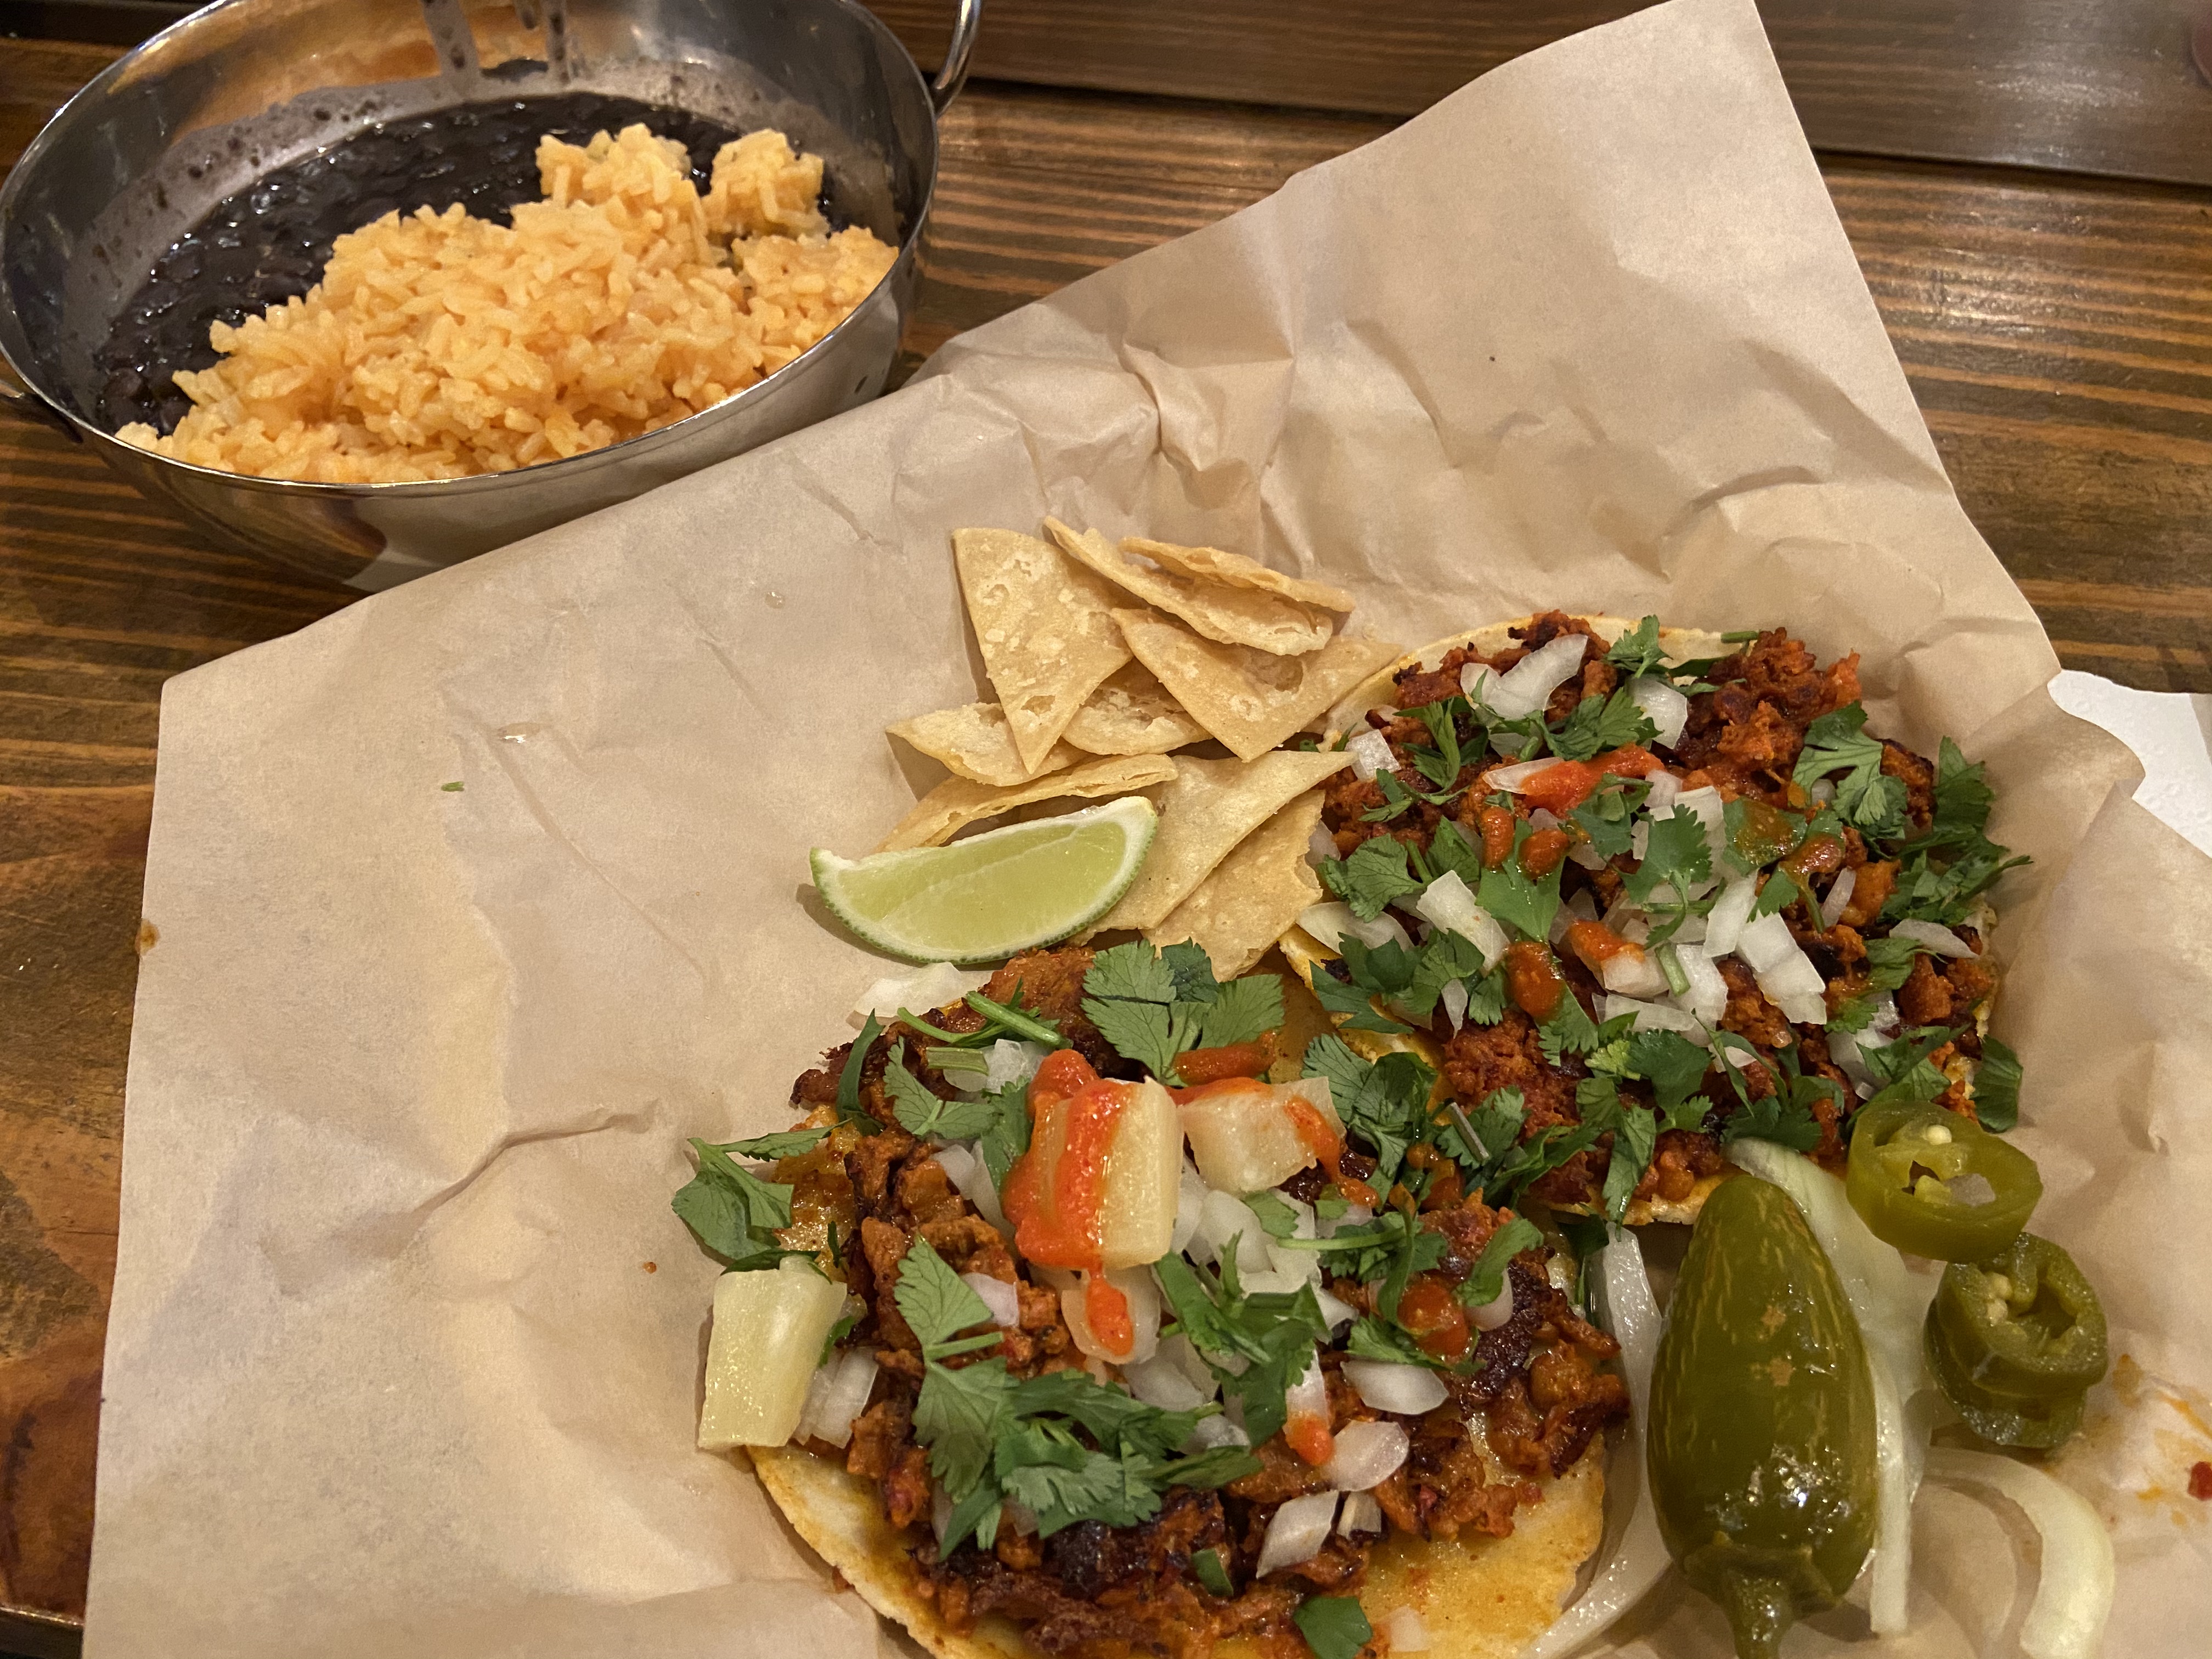 An order of two tacos and a side of beans and rice at Tight Tacos located inside Thirsty Monk.